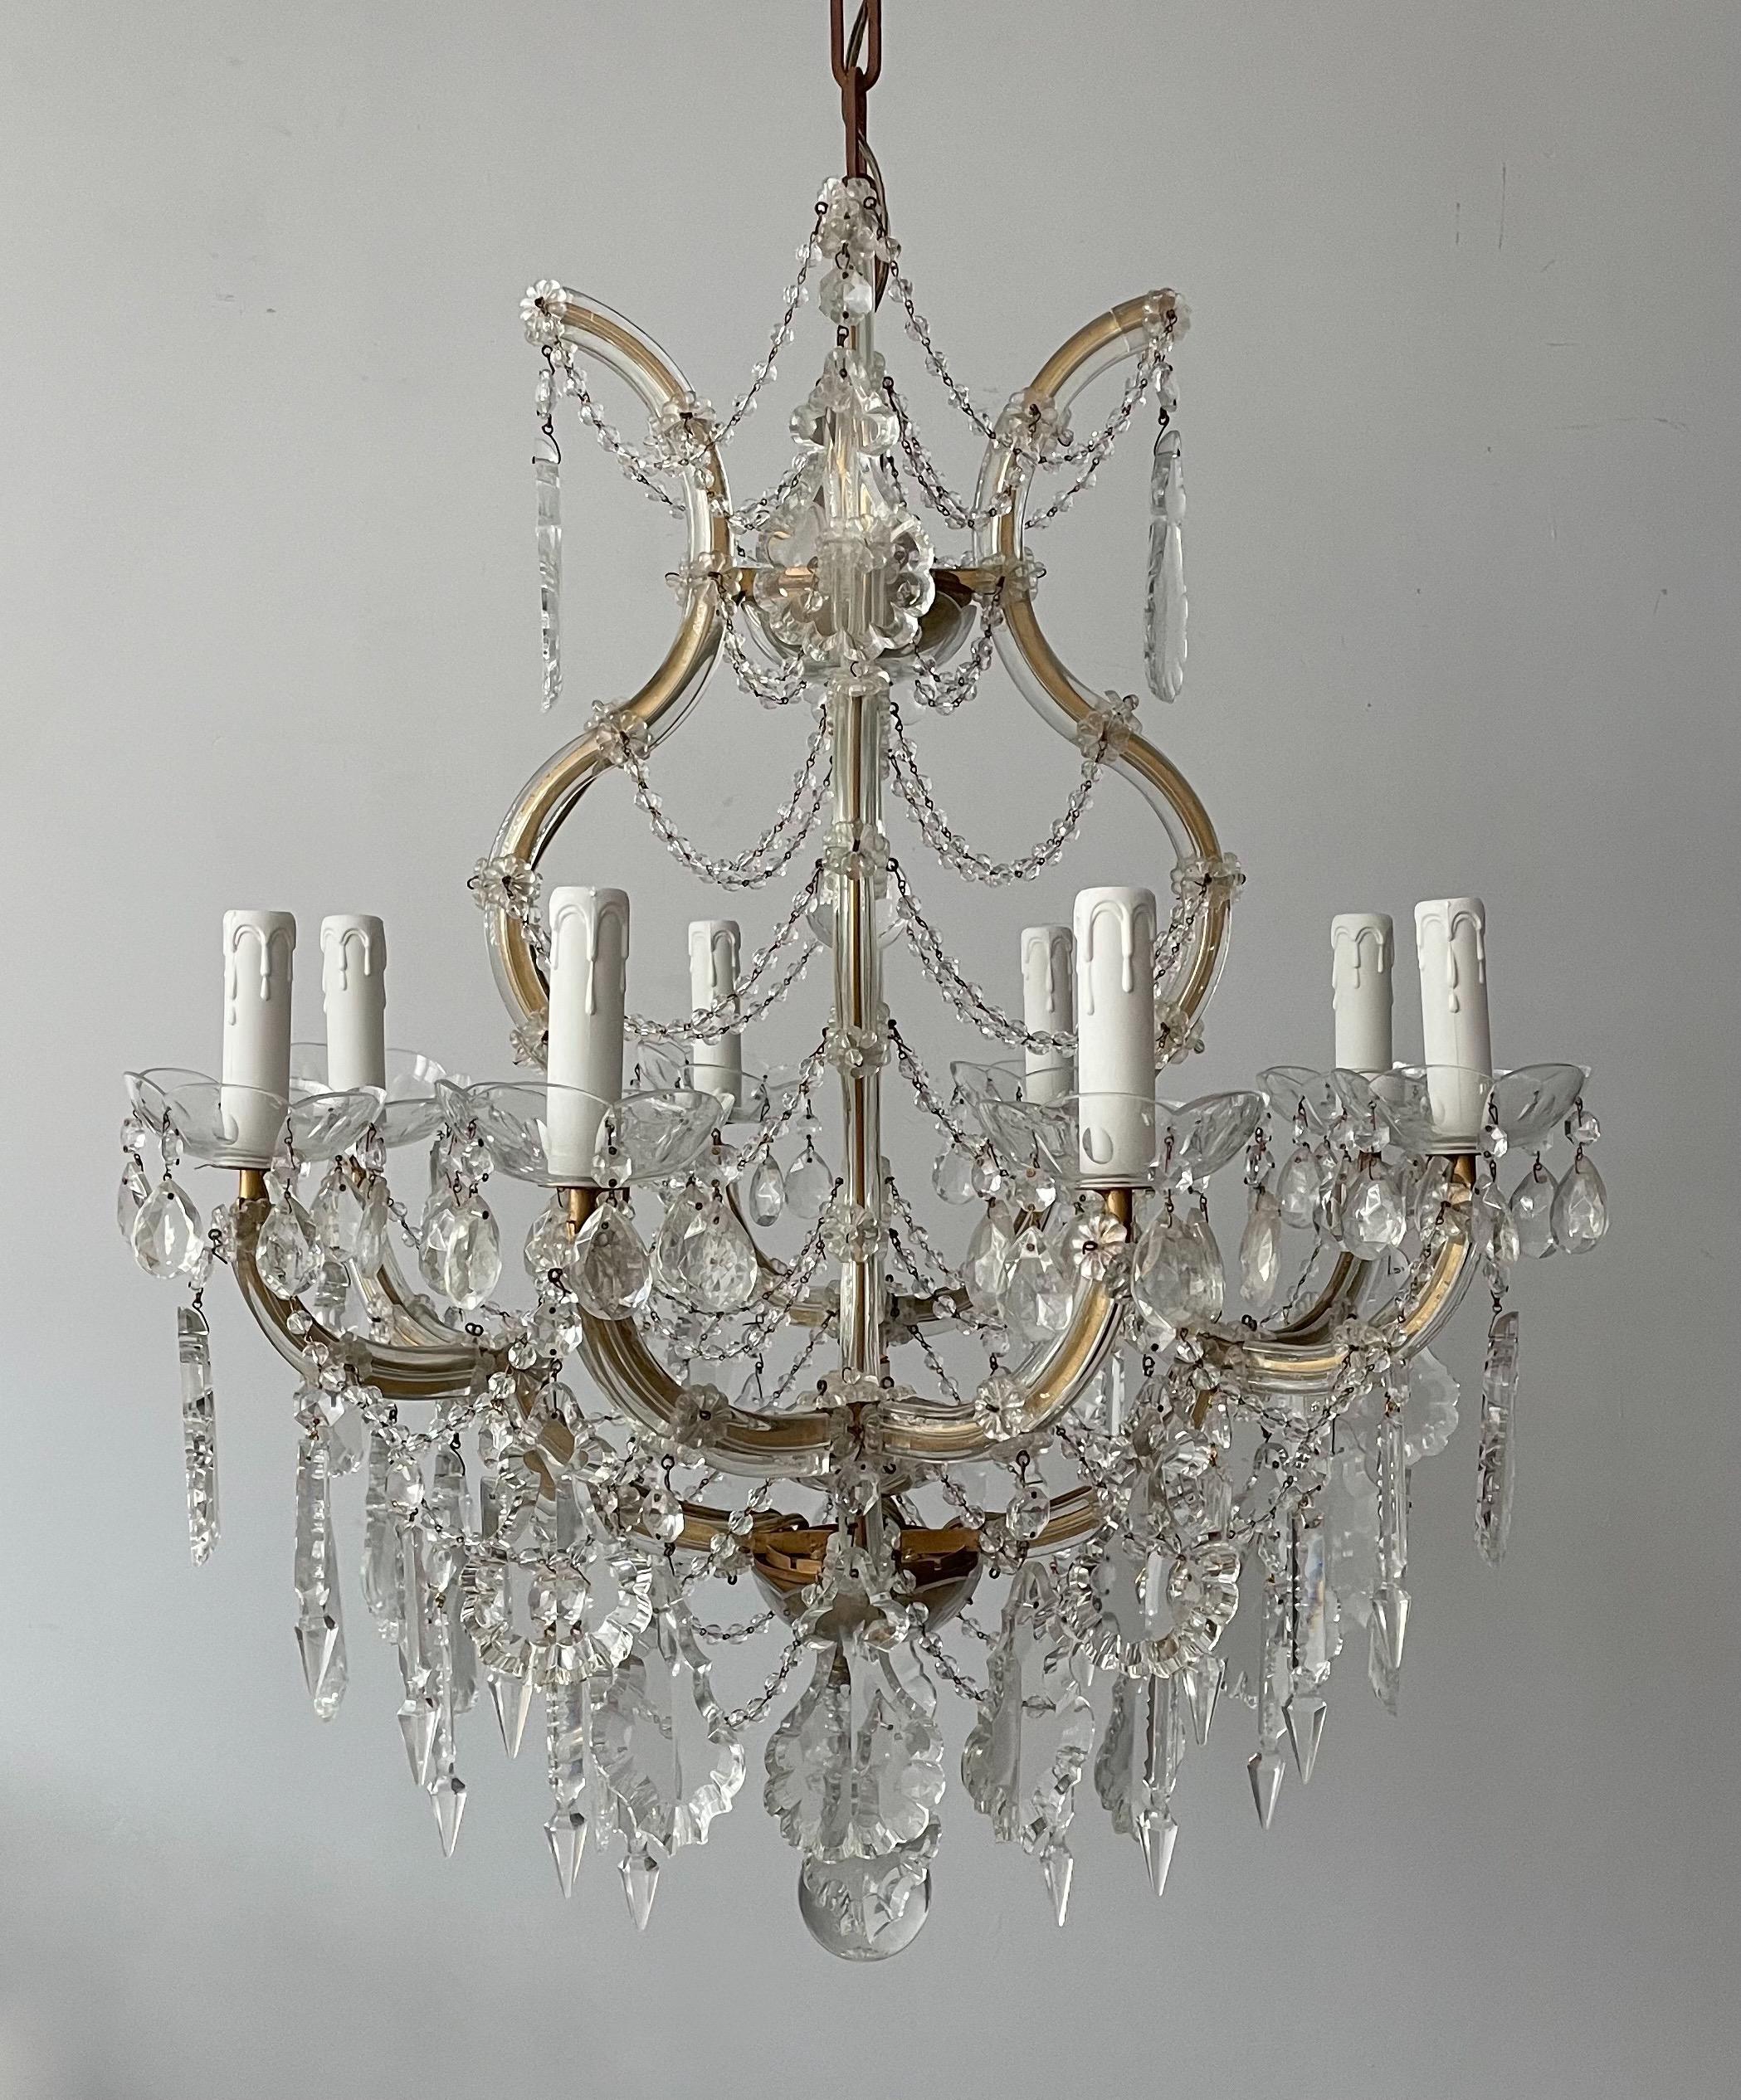 Graceful, vintage Italian crystal chandelier in the Maria Theresa style.

The chandelier consists of a gilded iron frame sandwiched between clear blown glass plates which are held in place by glass florets. French crystal pendants and garlands of